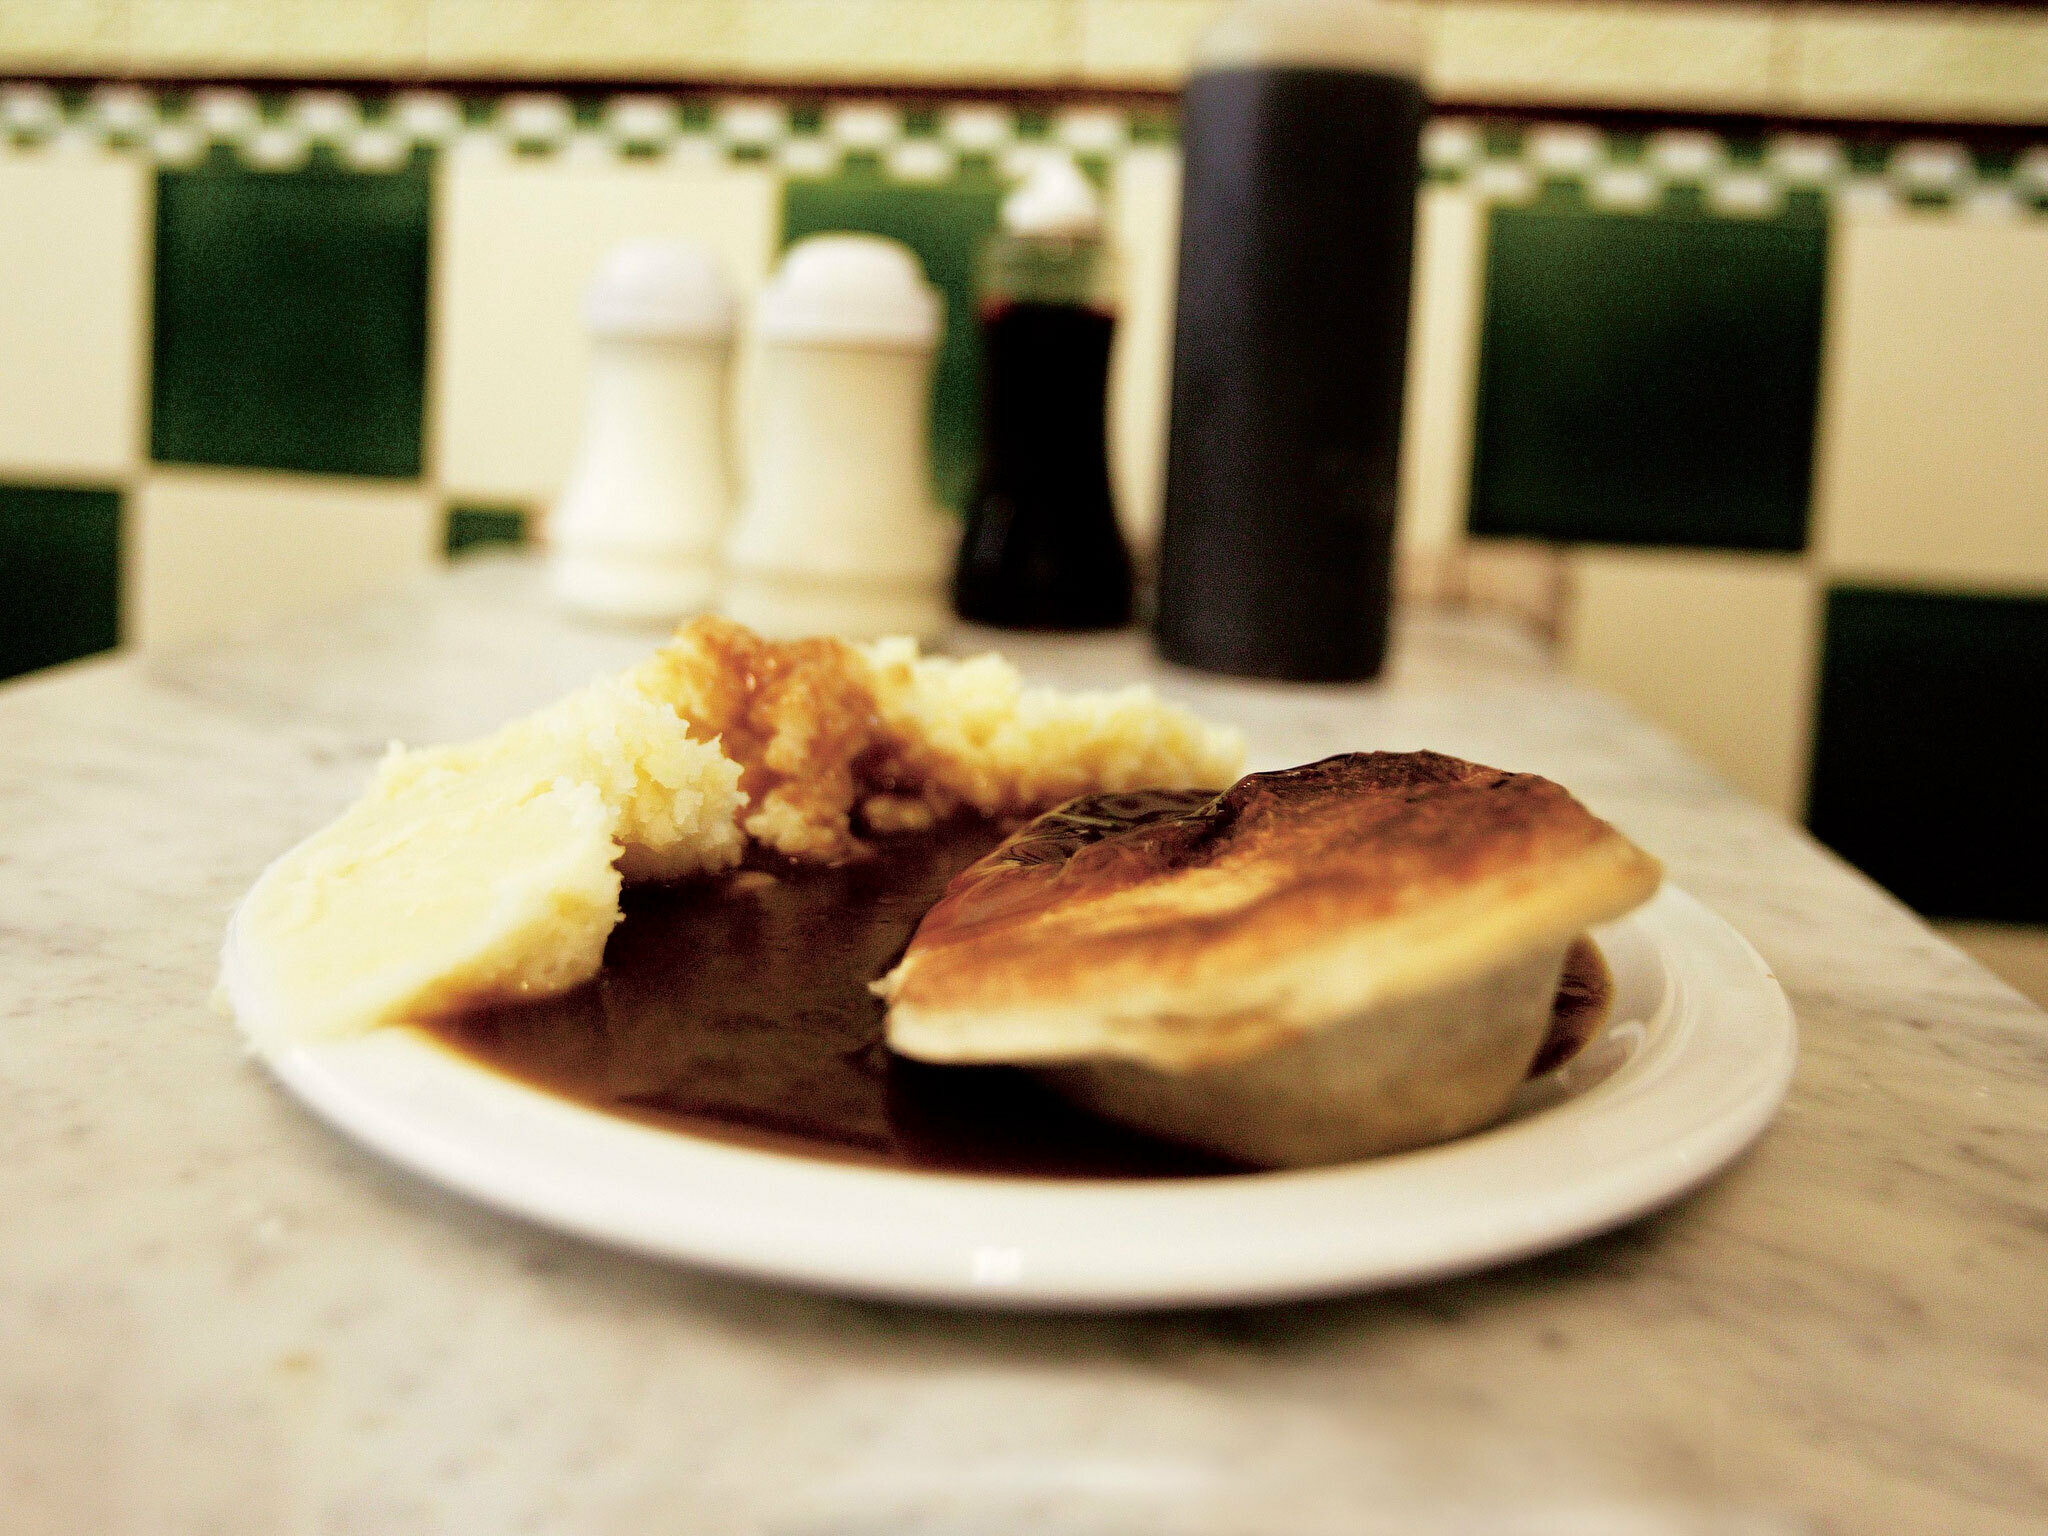 after-over-100-years,-this-iconic-london-pie-and-mash-shop-is-closing-for-good